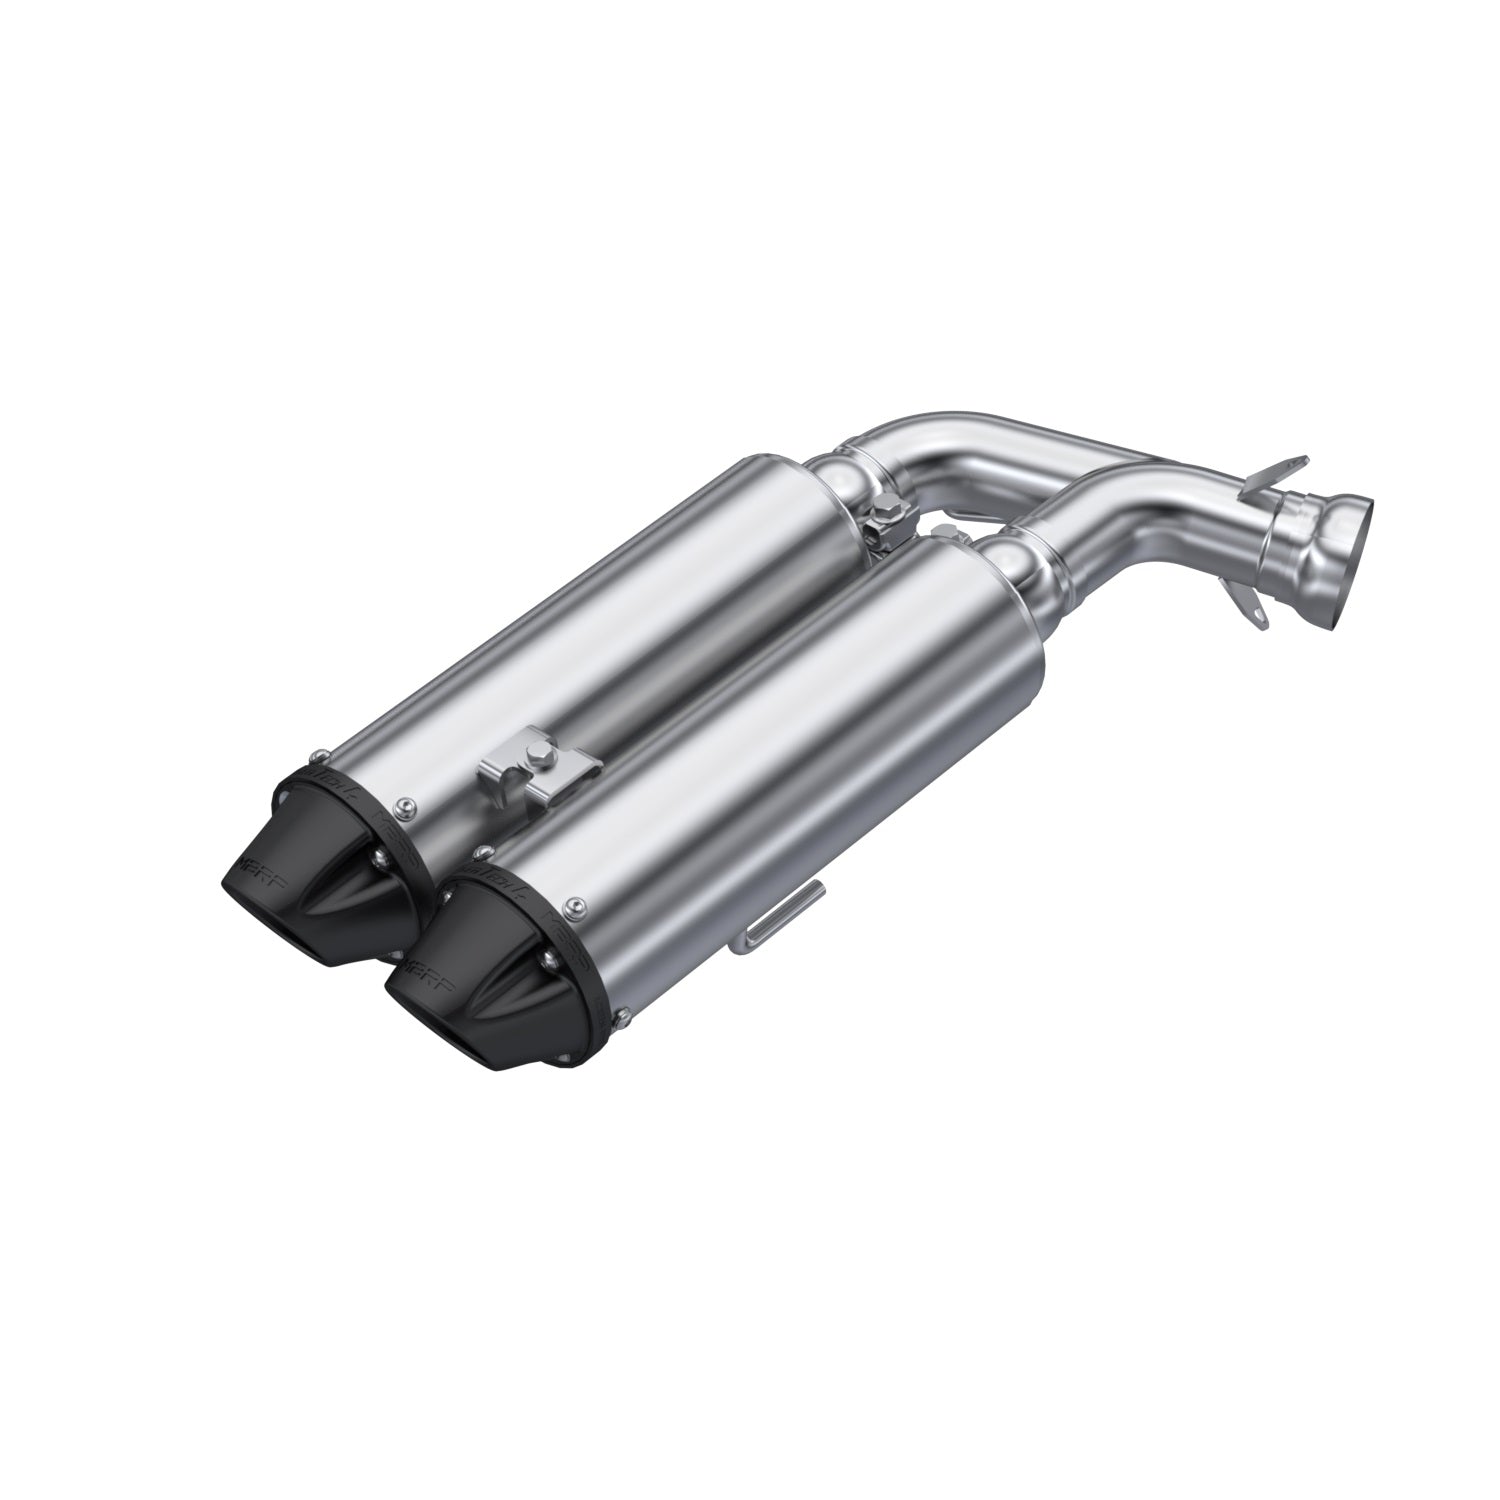 MBRP Exhaust 2020-2023 Polaris Sportsman XP 1000S and Scrambler XP 1000 Performance Series 4 Inch Dual Slip-on Exhaust MBRP AT-9534PT